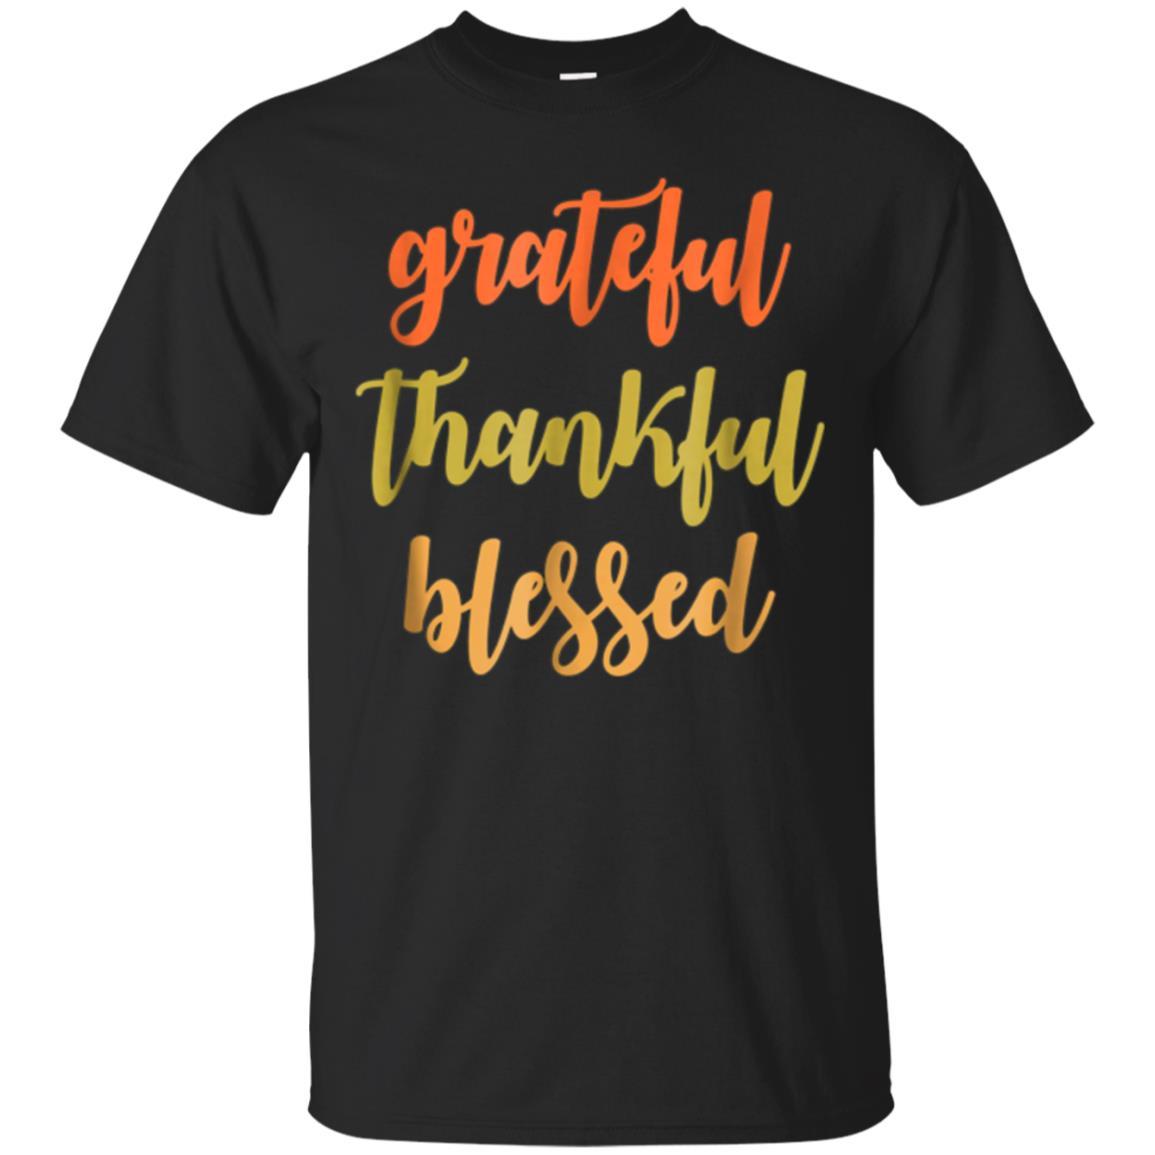 Shop From 1000 Unique Grateful Thankful And Blessed - Thanksgiving T-shirt